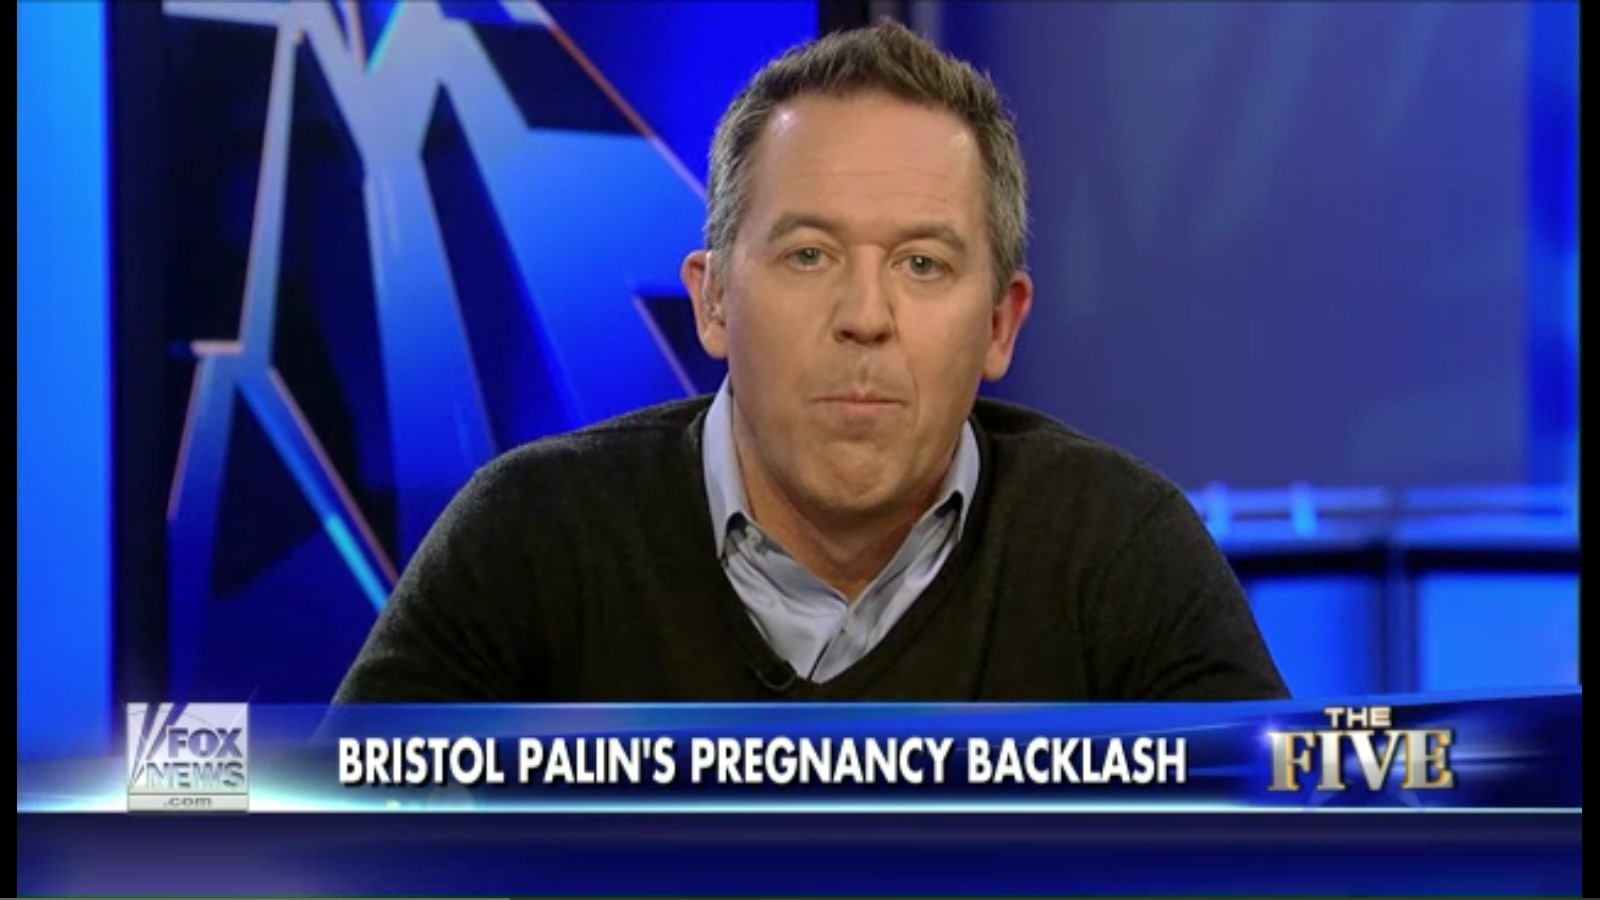 Fox News’ ‘The Five’ In Agreement That Bristol Palin Is A Brave Hero For Getting Pregnant